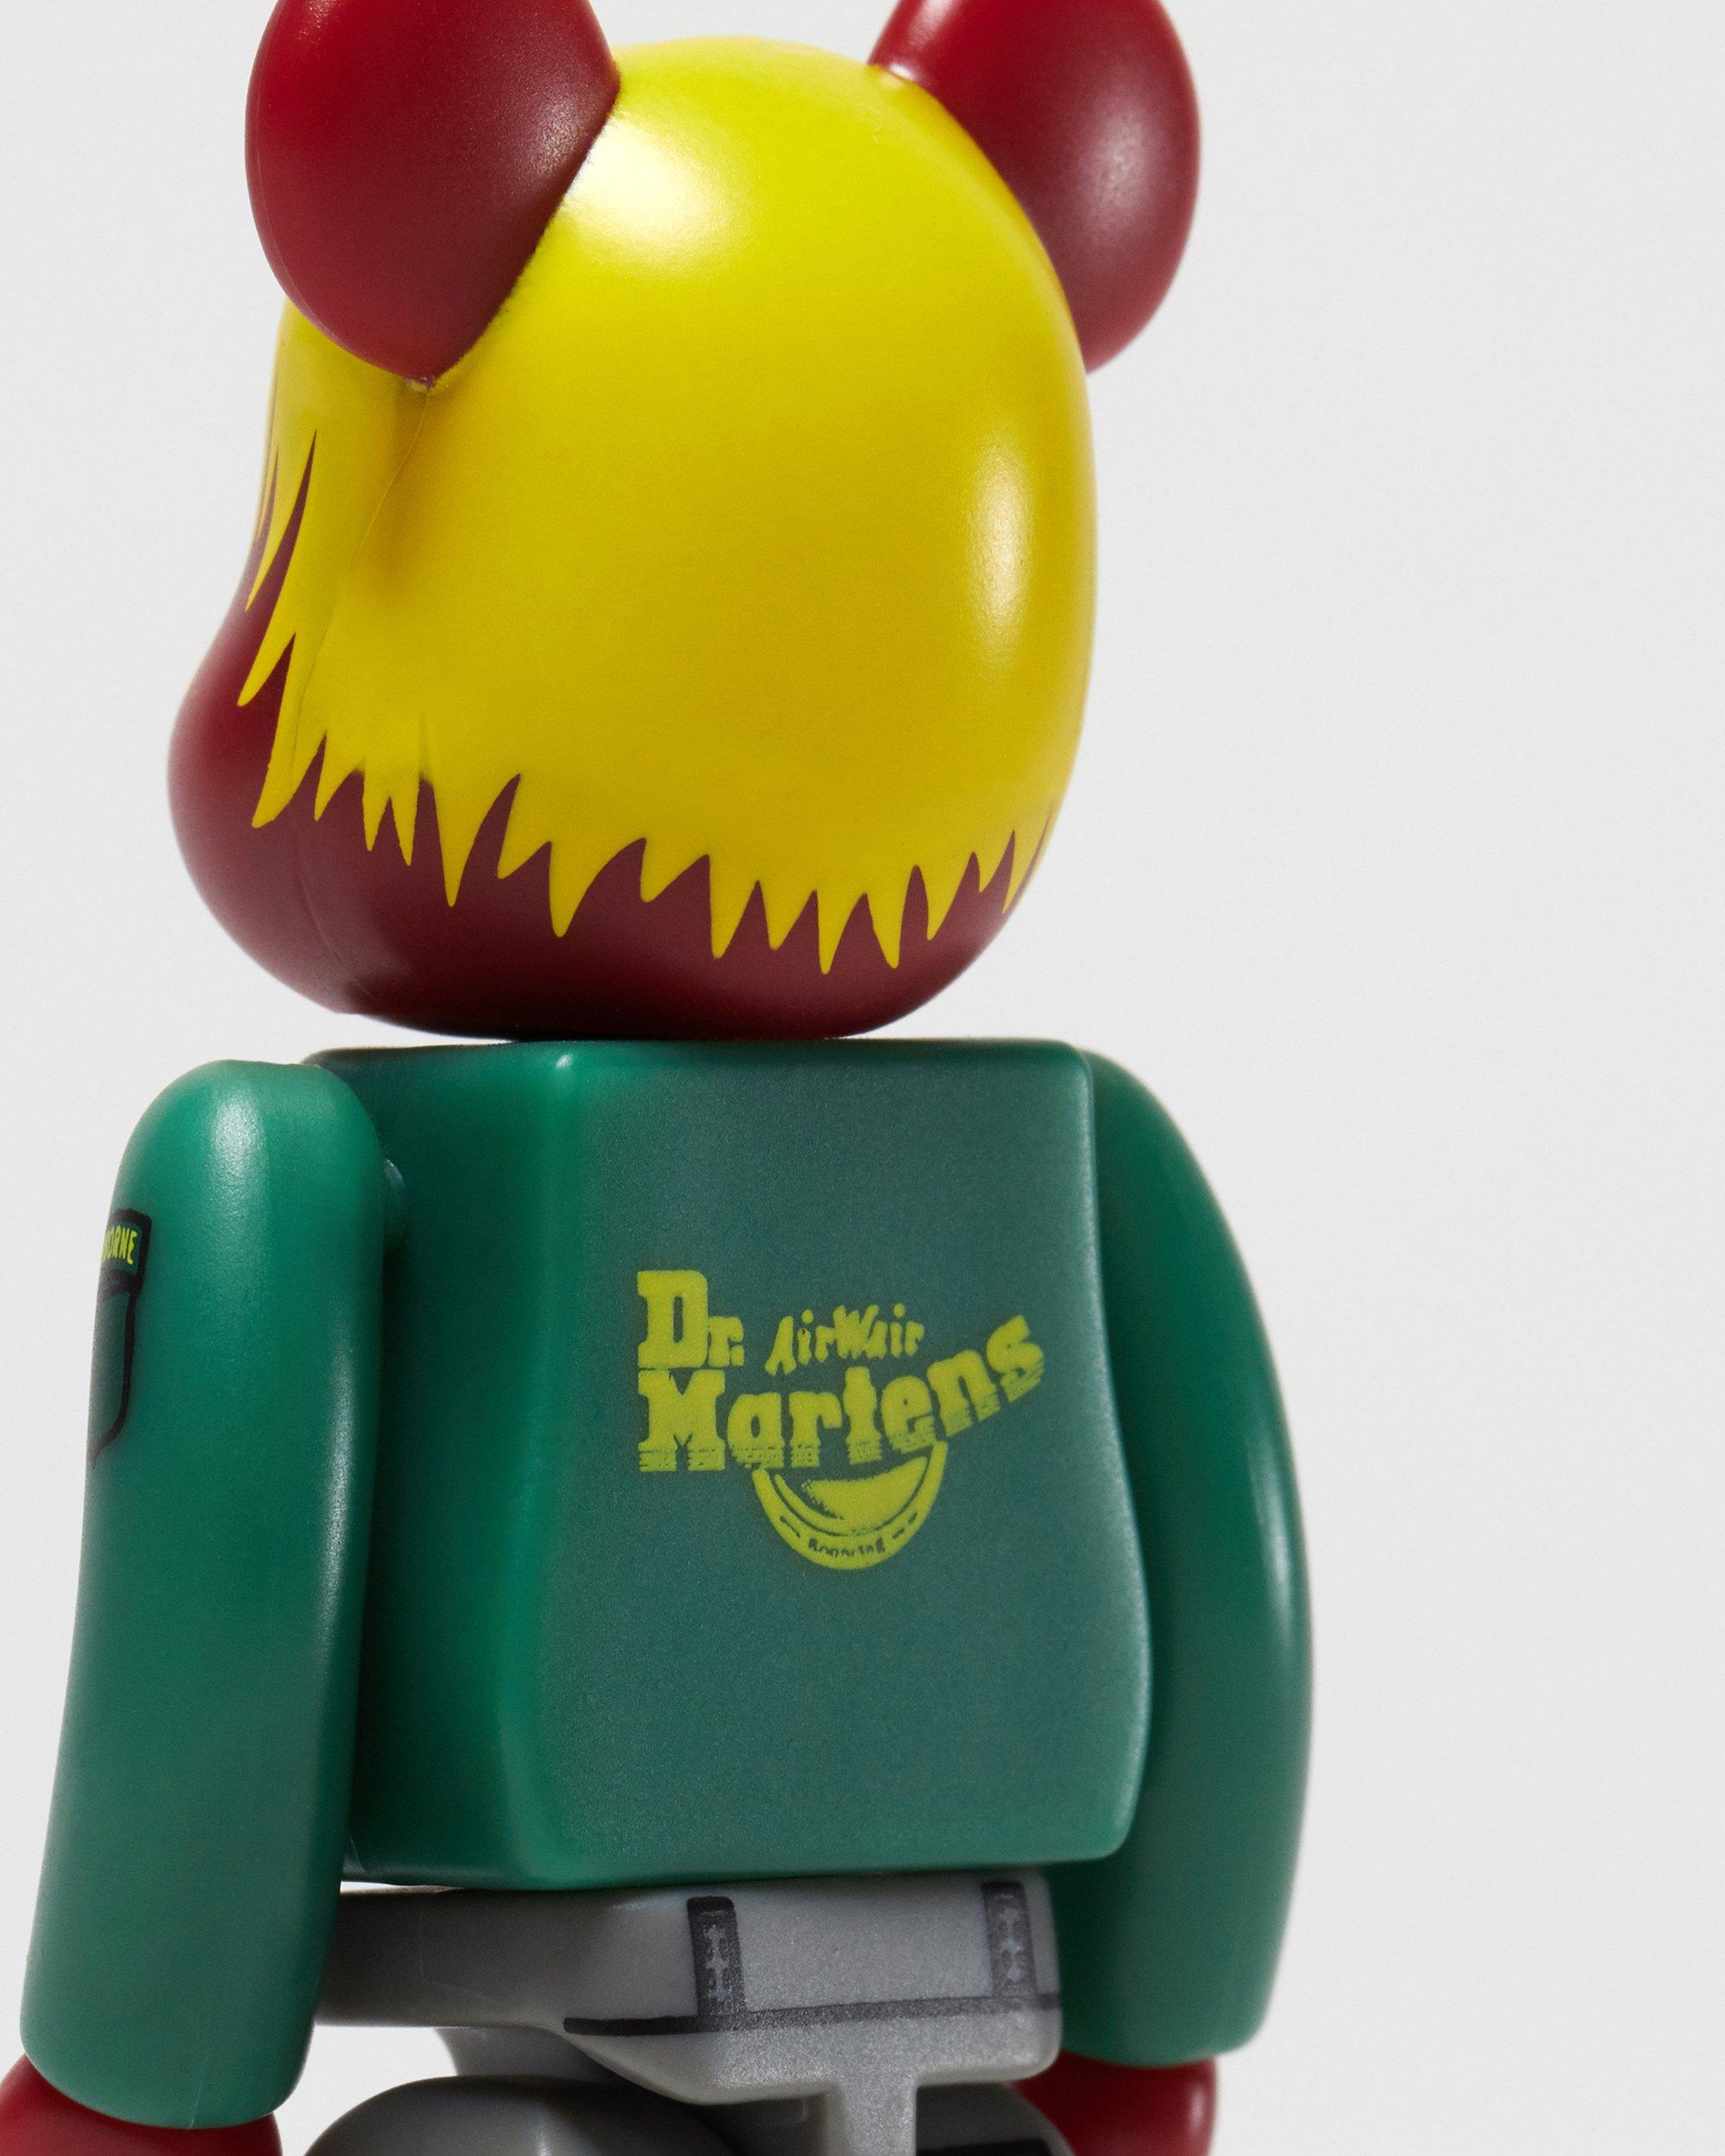 ACTION FIGURE BE@RBRICK in Action Figure Be@Rbrick Anni '90